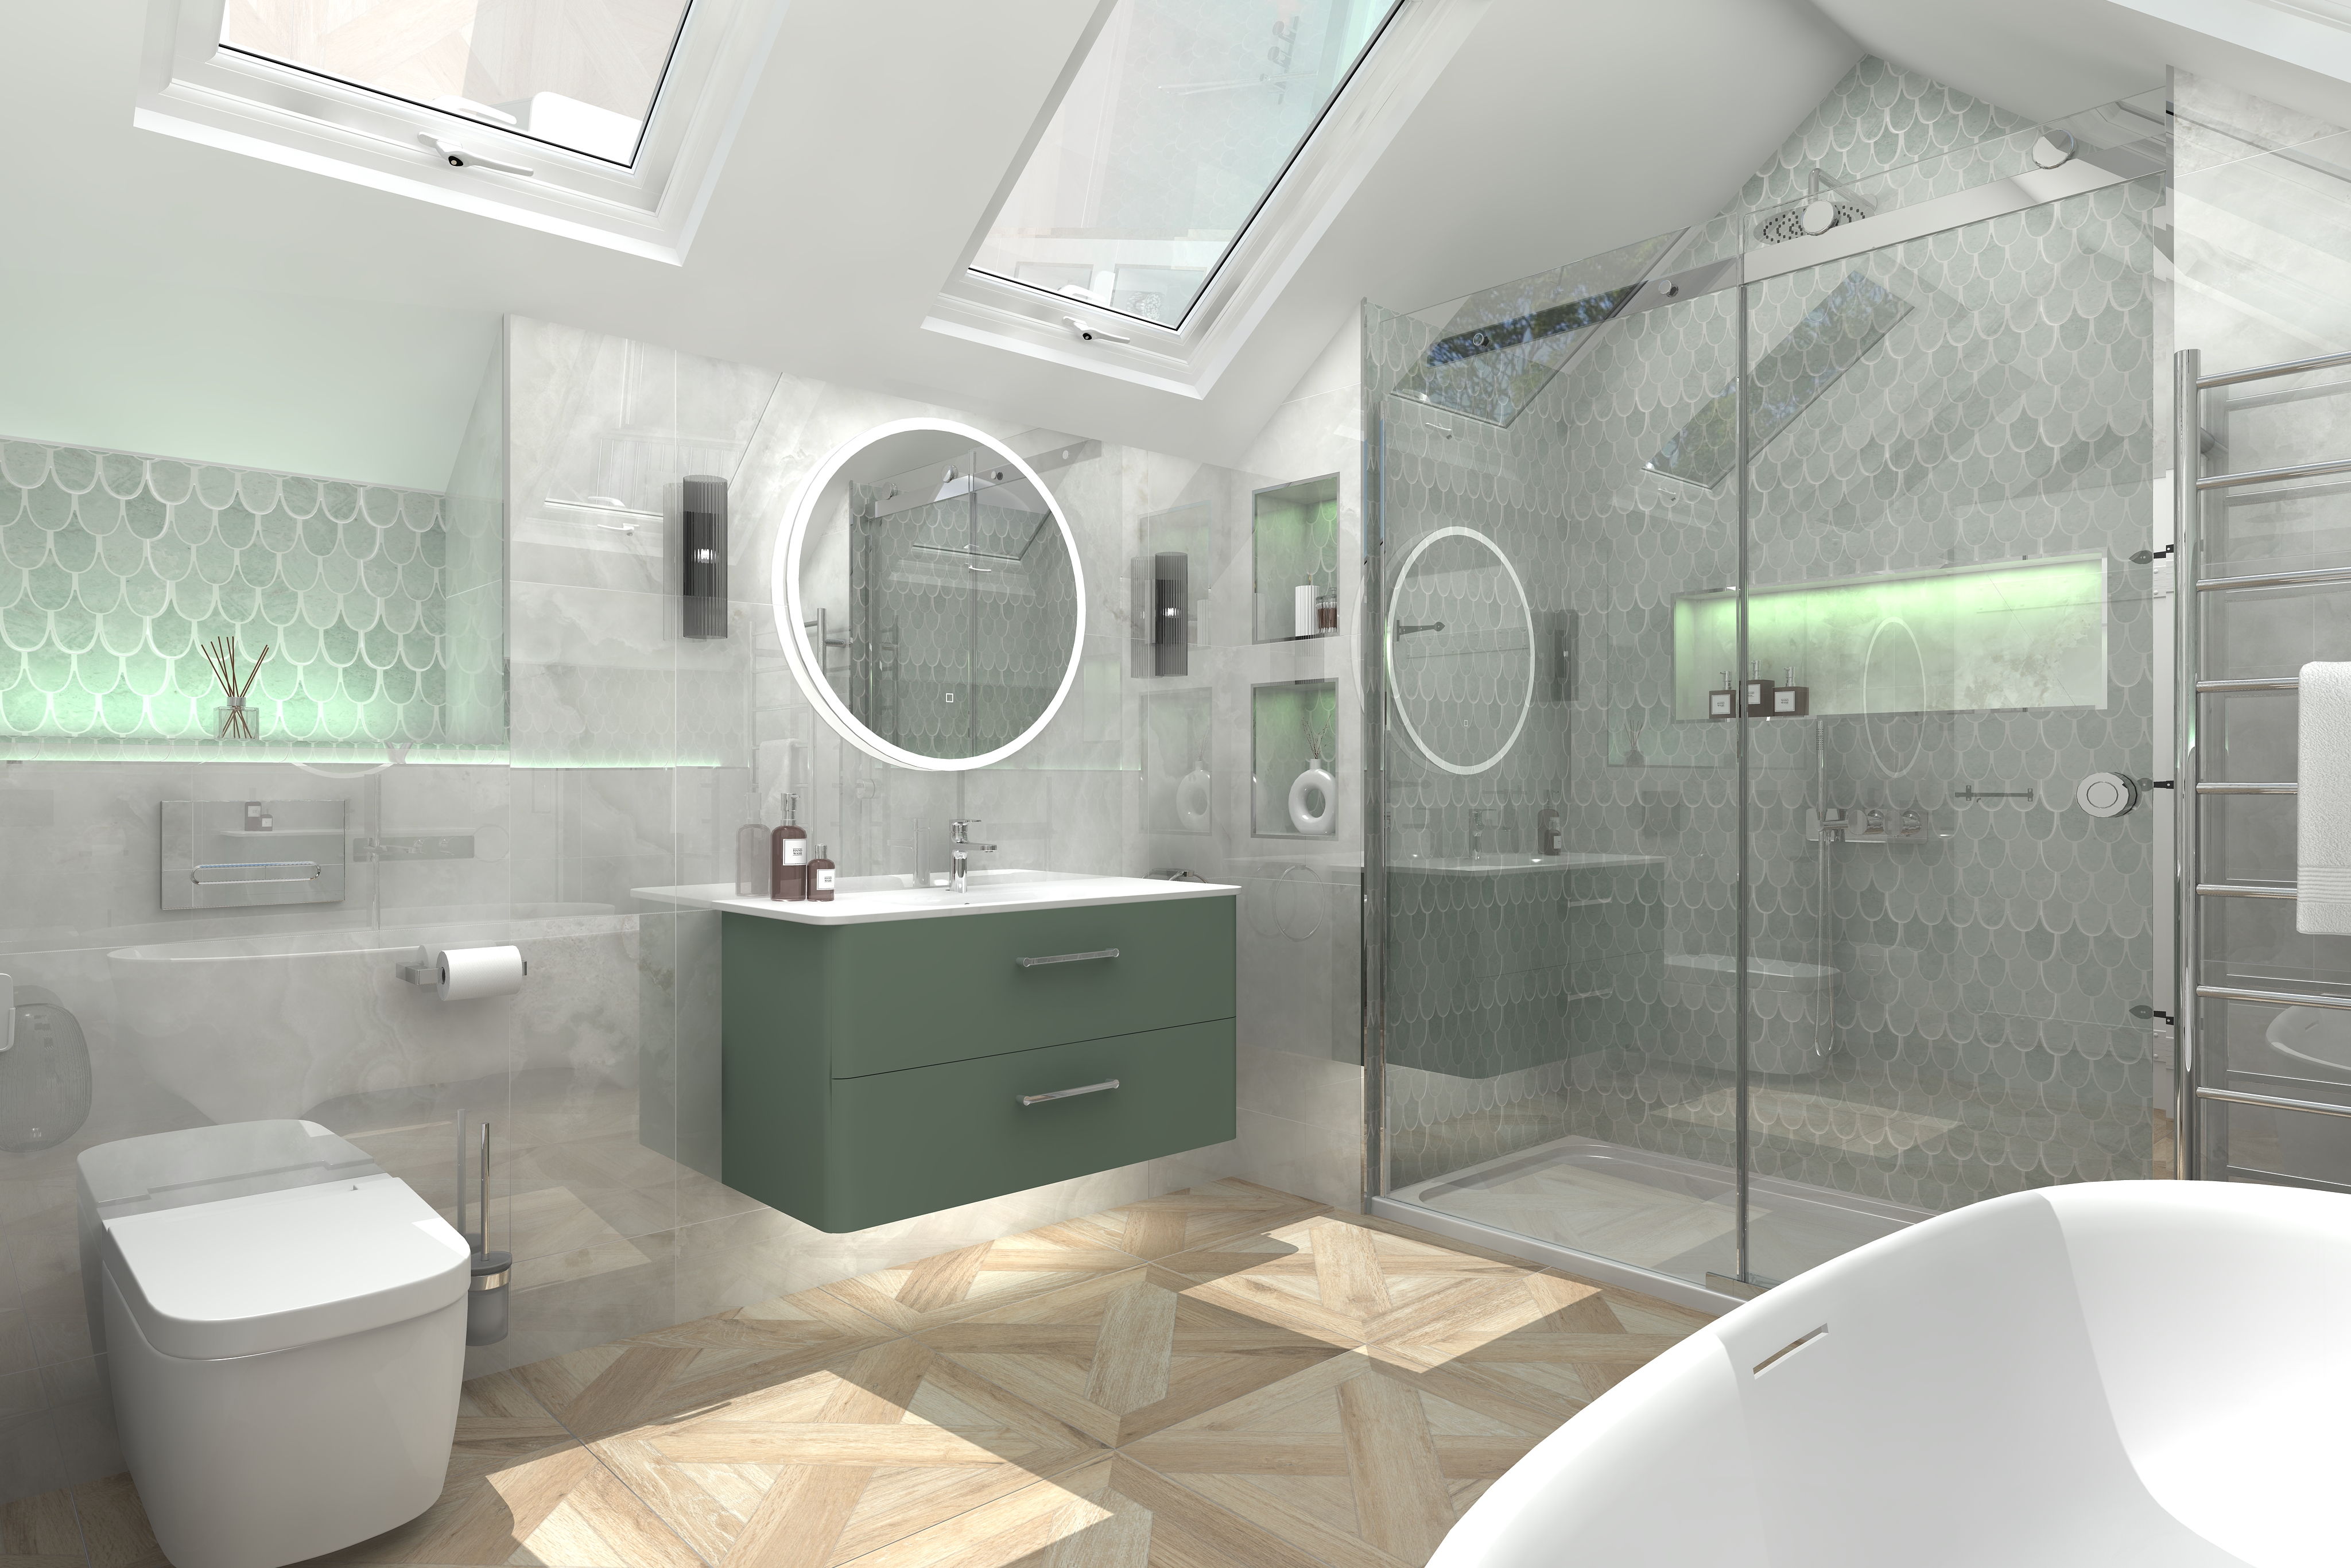 Digital lifestyle image of the Virgo inspired bathroom, with wall hung toilet paired with chrome push plate, chrome toilet roll holder and wall mounted toilet bush holder, integrated shelf with infuser, wall mounted green washbasin vanity unit with chrome basin tap and a round LED mirror with two cylindrical lights on either side